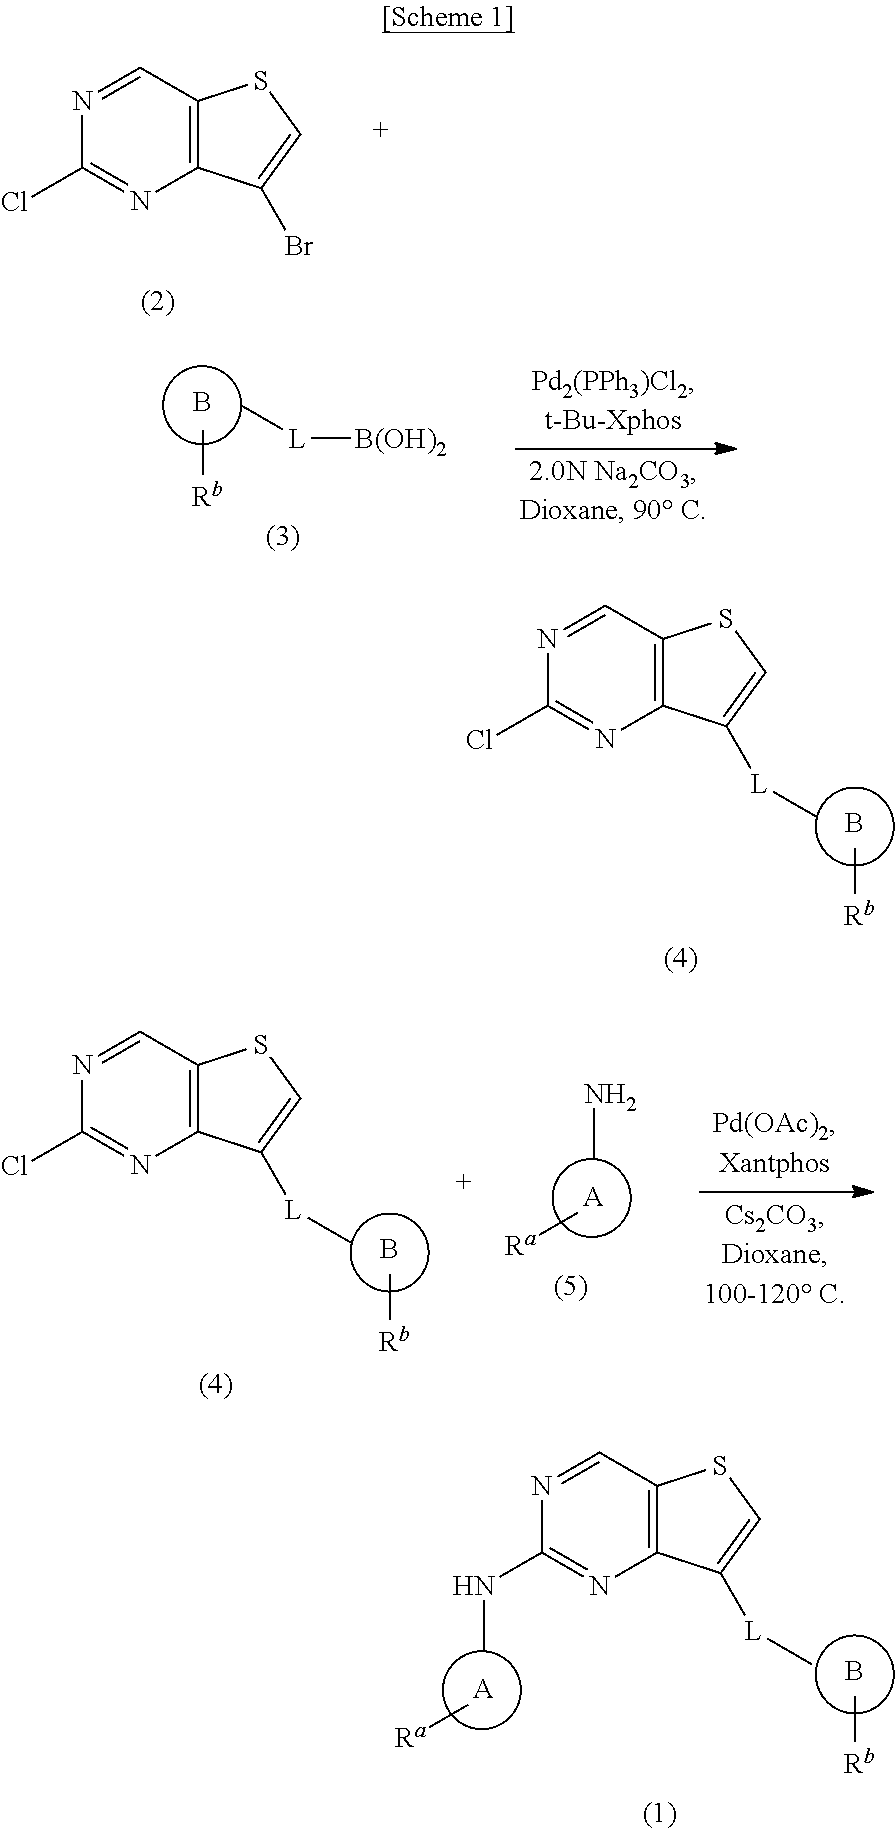 2,7-substituted thieno[3,2-d] pyrimidine compounds as protein kinase inhibitors